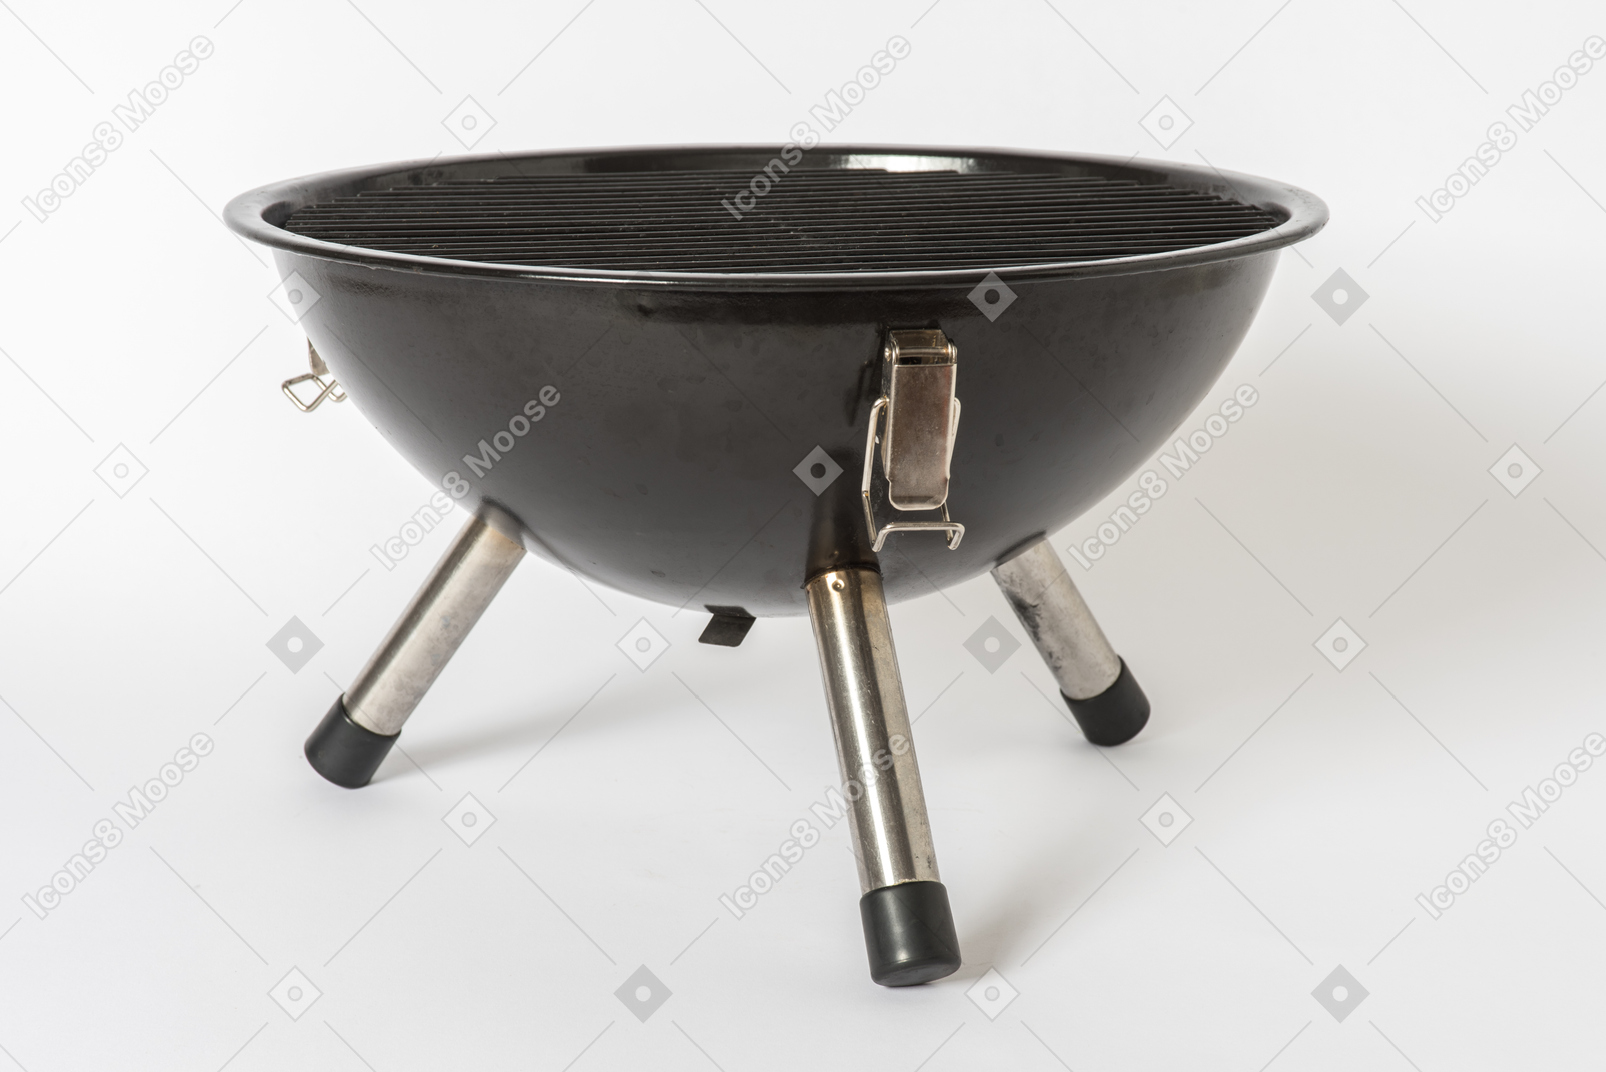 Grill on white background